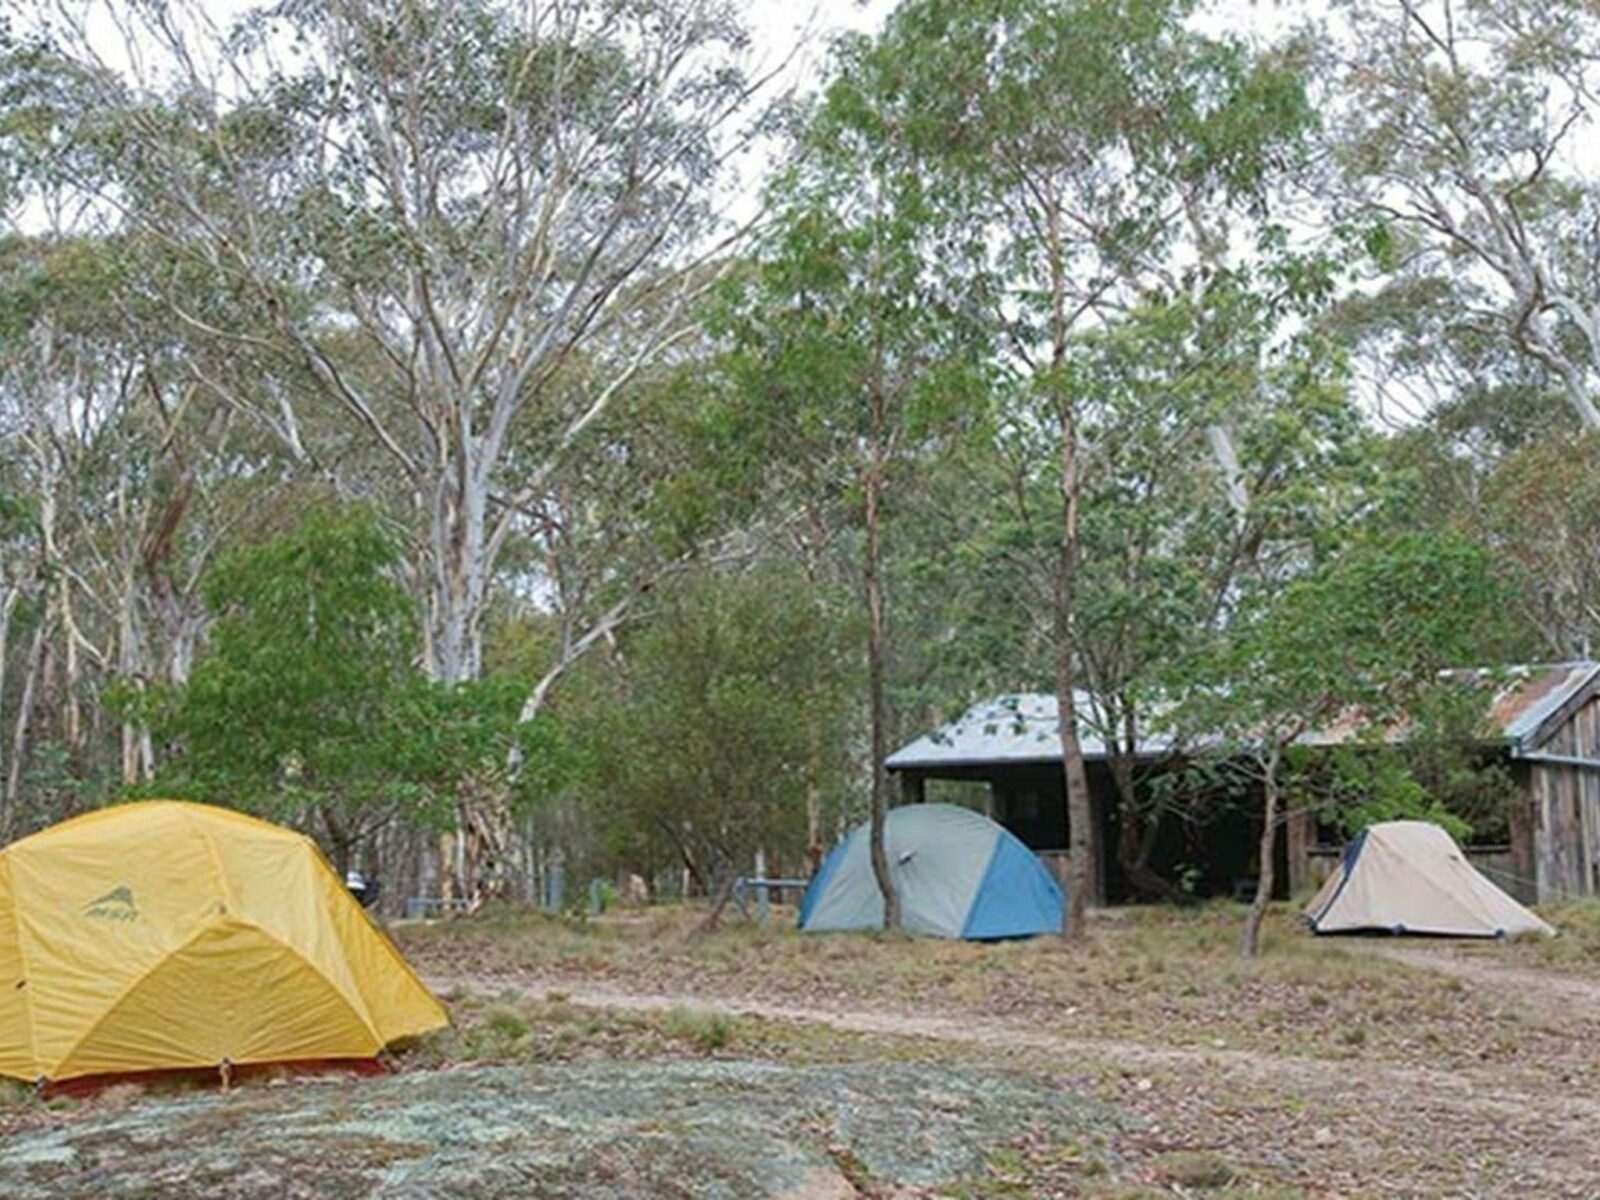 Tents at Boyd River campground, Kanangra-Boyd National Park. Photo: Nick Cubbin © DPIE